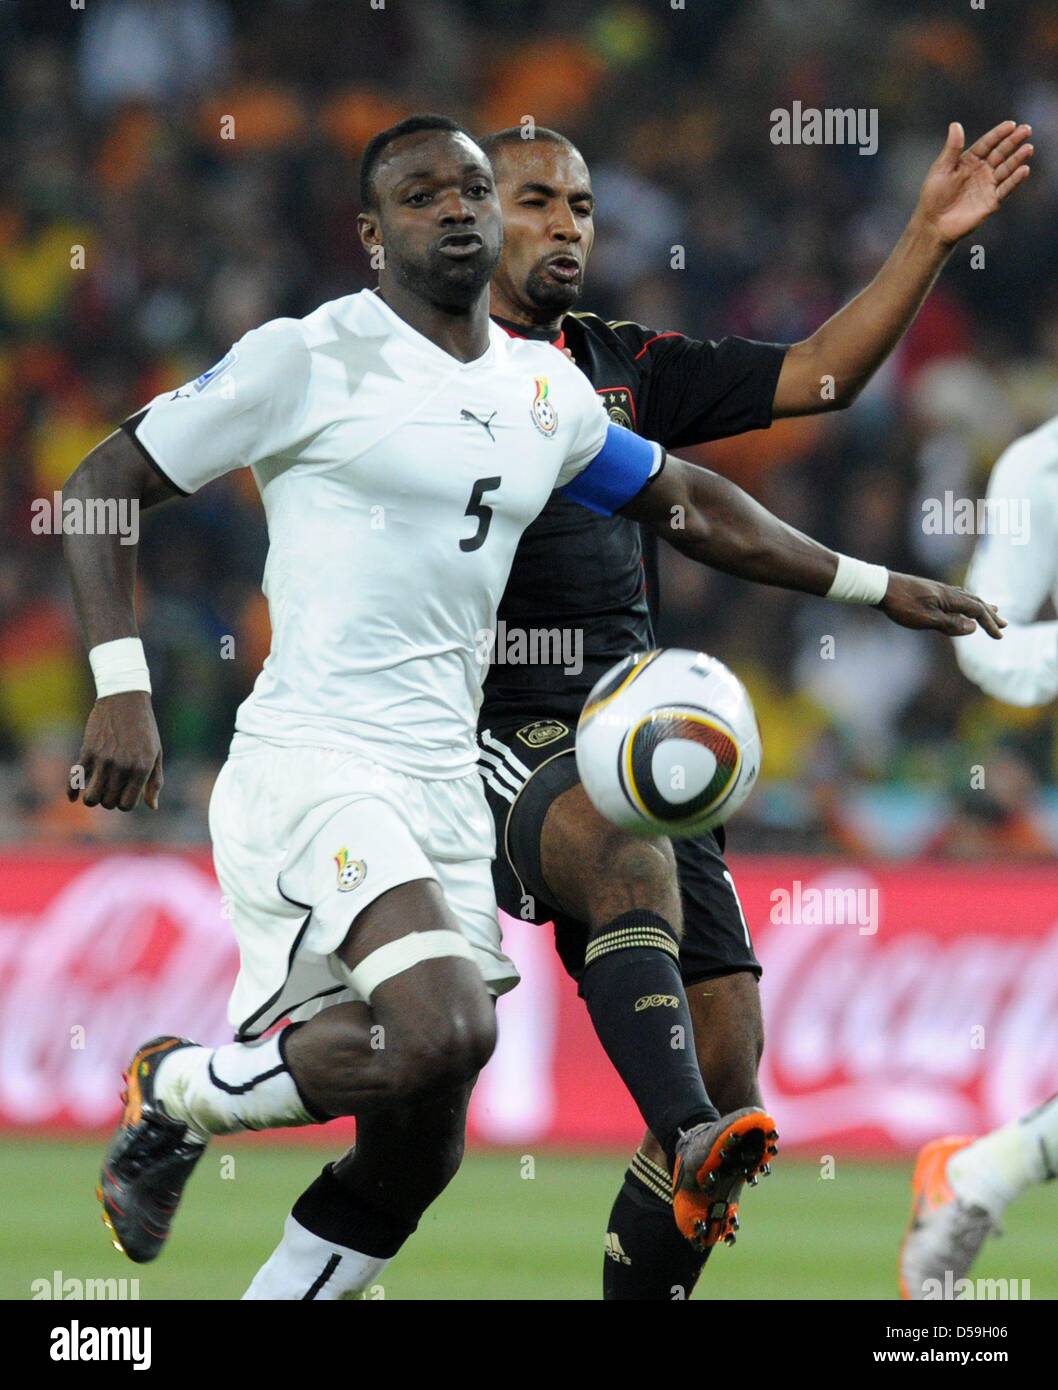 John Mensah (R) of Ghana vies with Cacau of Germany during the FIFA World Cup 2010 group D match between Ghana and Germany at the Soccer City Stadium in Johannesburg, South Africa 23 June 2010. Photo: Bernd Weissbrod dpa - Please refer to http://dpaq.de/FIFA-WM2010-TC Stock Photo